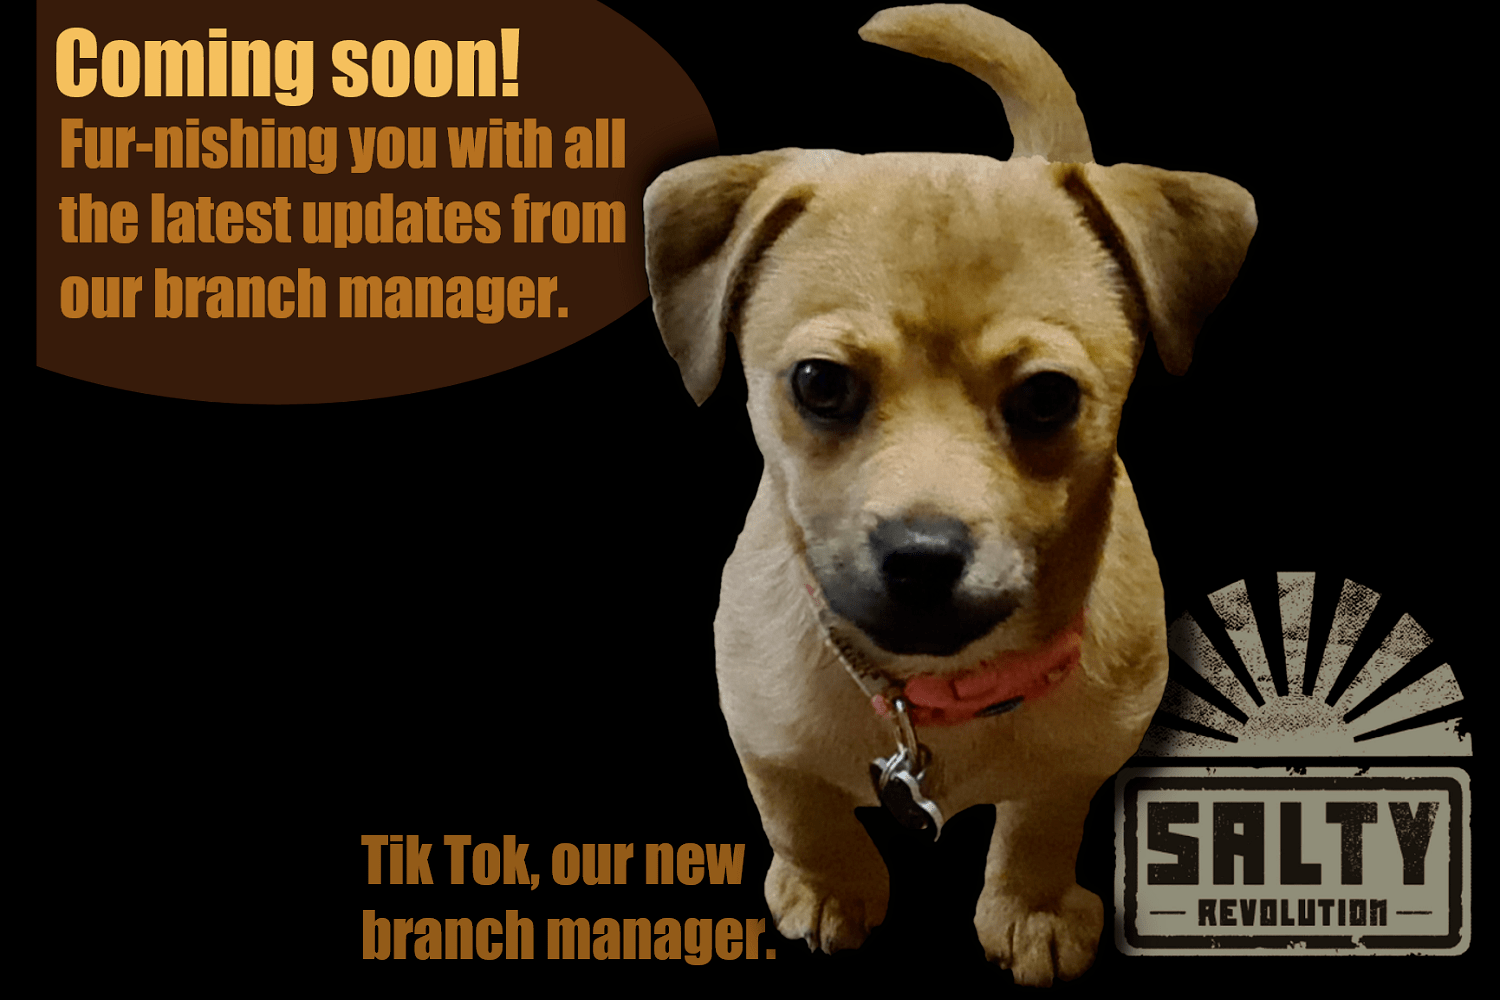 = GRAPHIC Our new branch manager Tik Tok 1500px x 1000px png comp.png